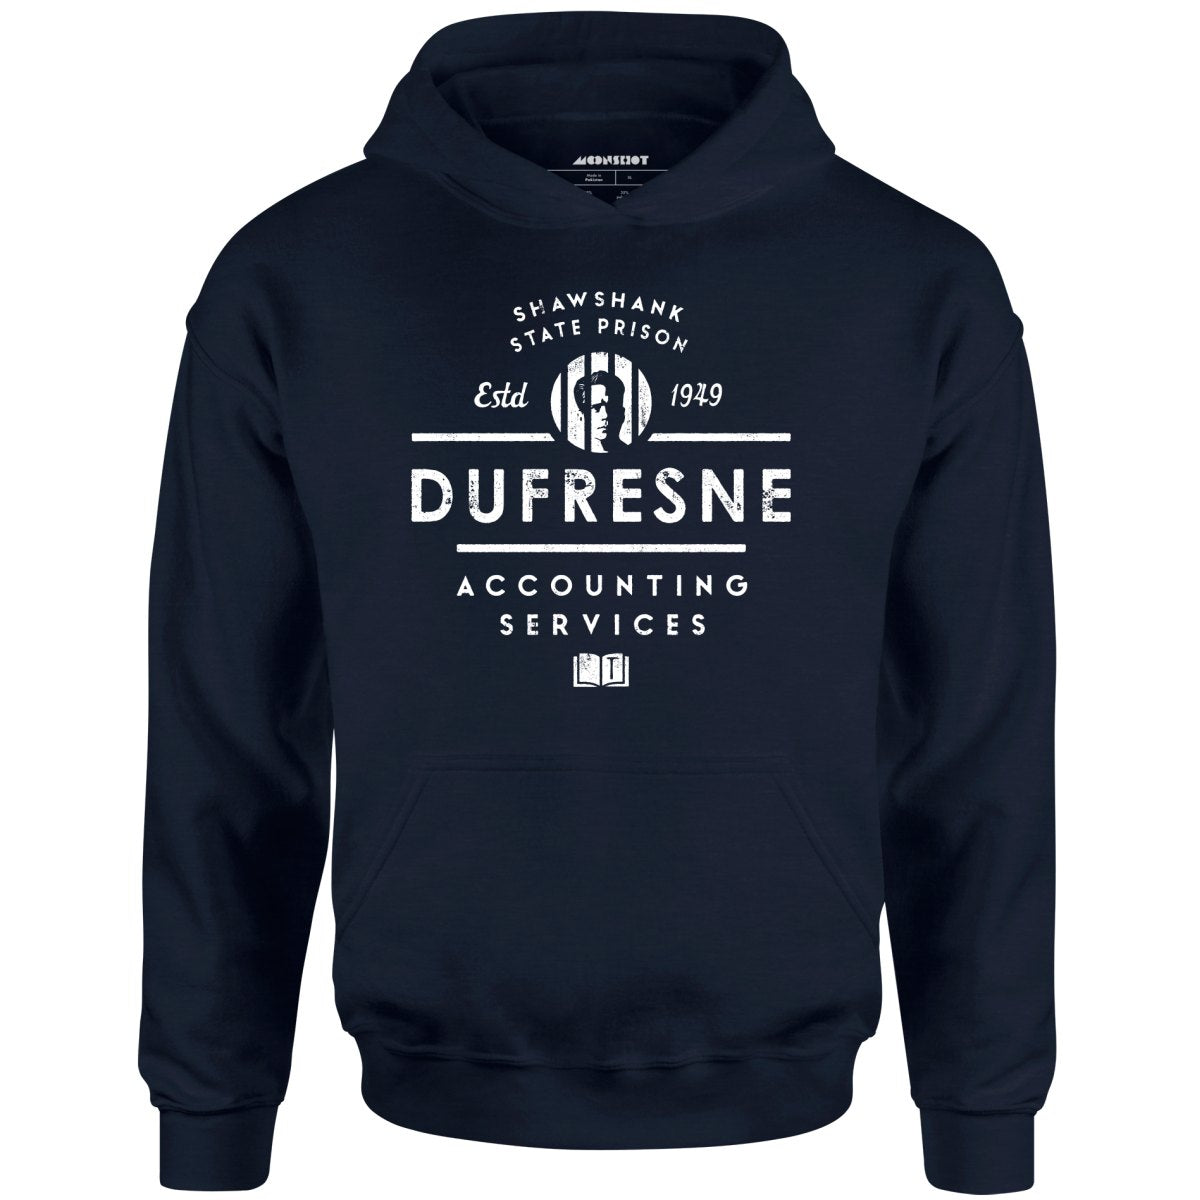 Dufresne Accounting Services - Unisex Hoodie